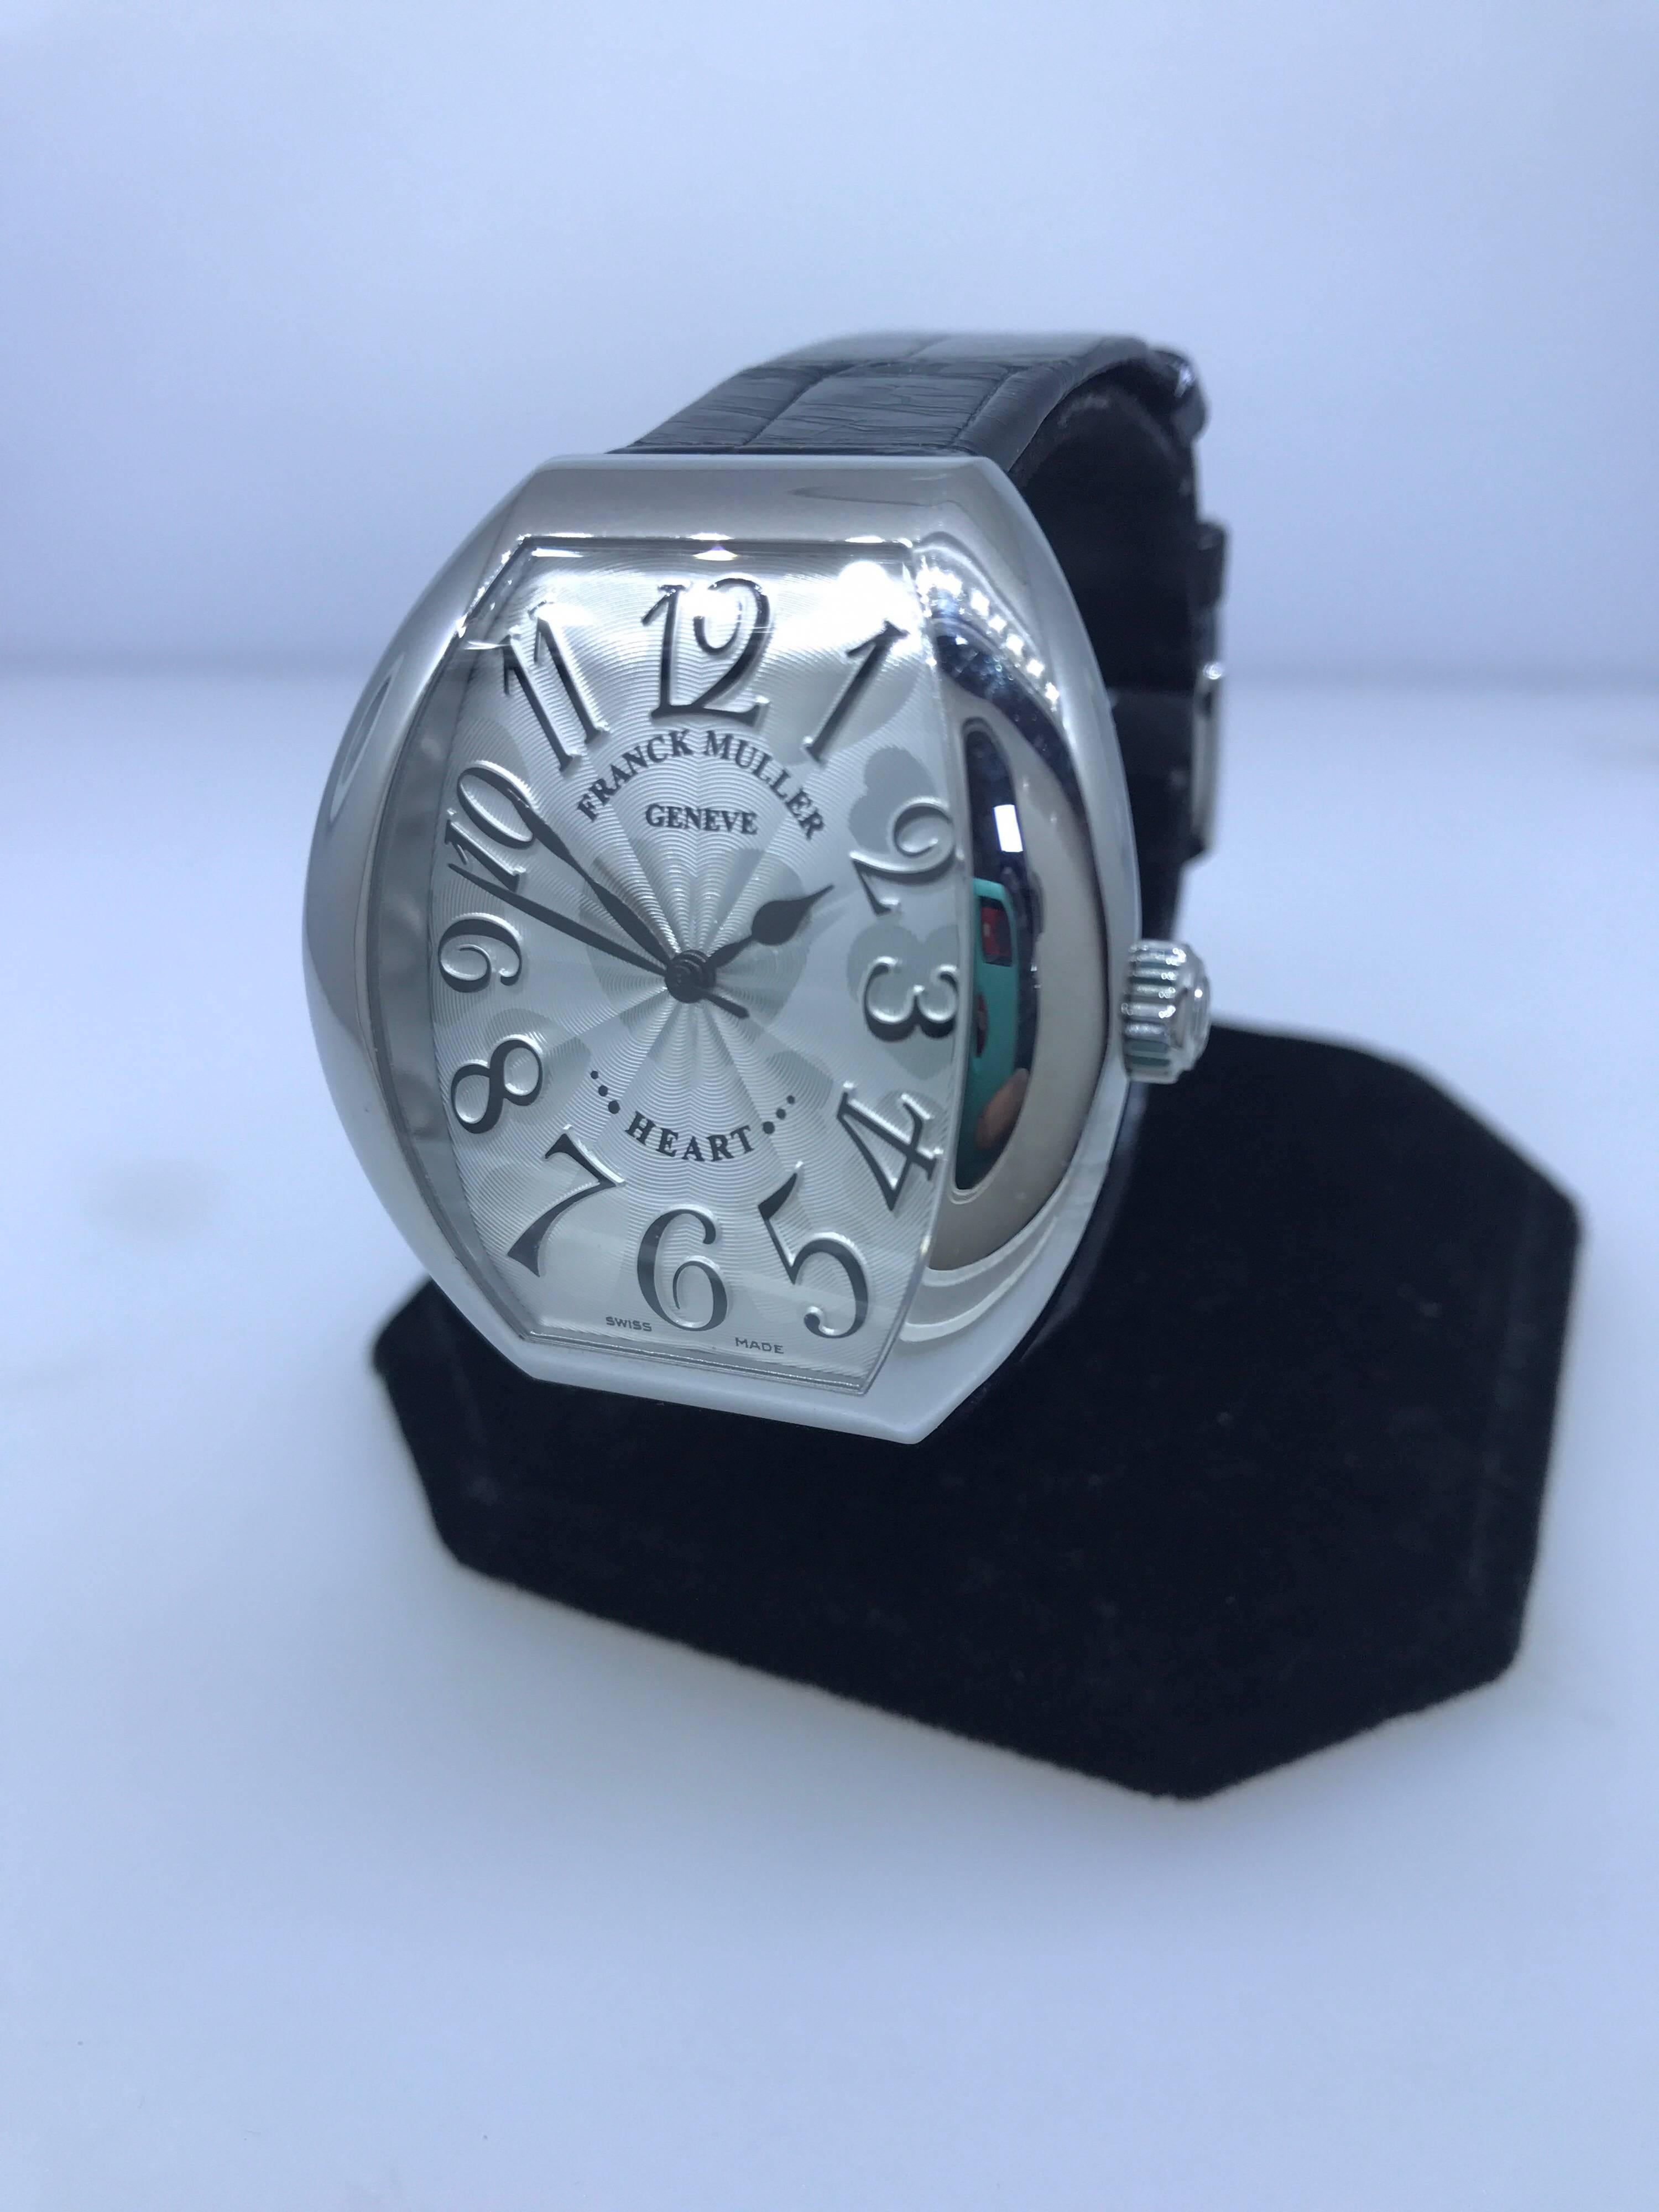 Franck Muller Tonneau Shaped Watch 

Model Number: 5000HSC

100% Authentic

New / Old Stock 

Comes with original Franck Muller box

Stainless Steel Case

Silver Dial with Hearts Motif

Case Dimensions: 34mm x 39.5mm

Black Crocodile Leather